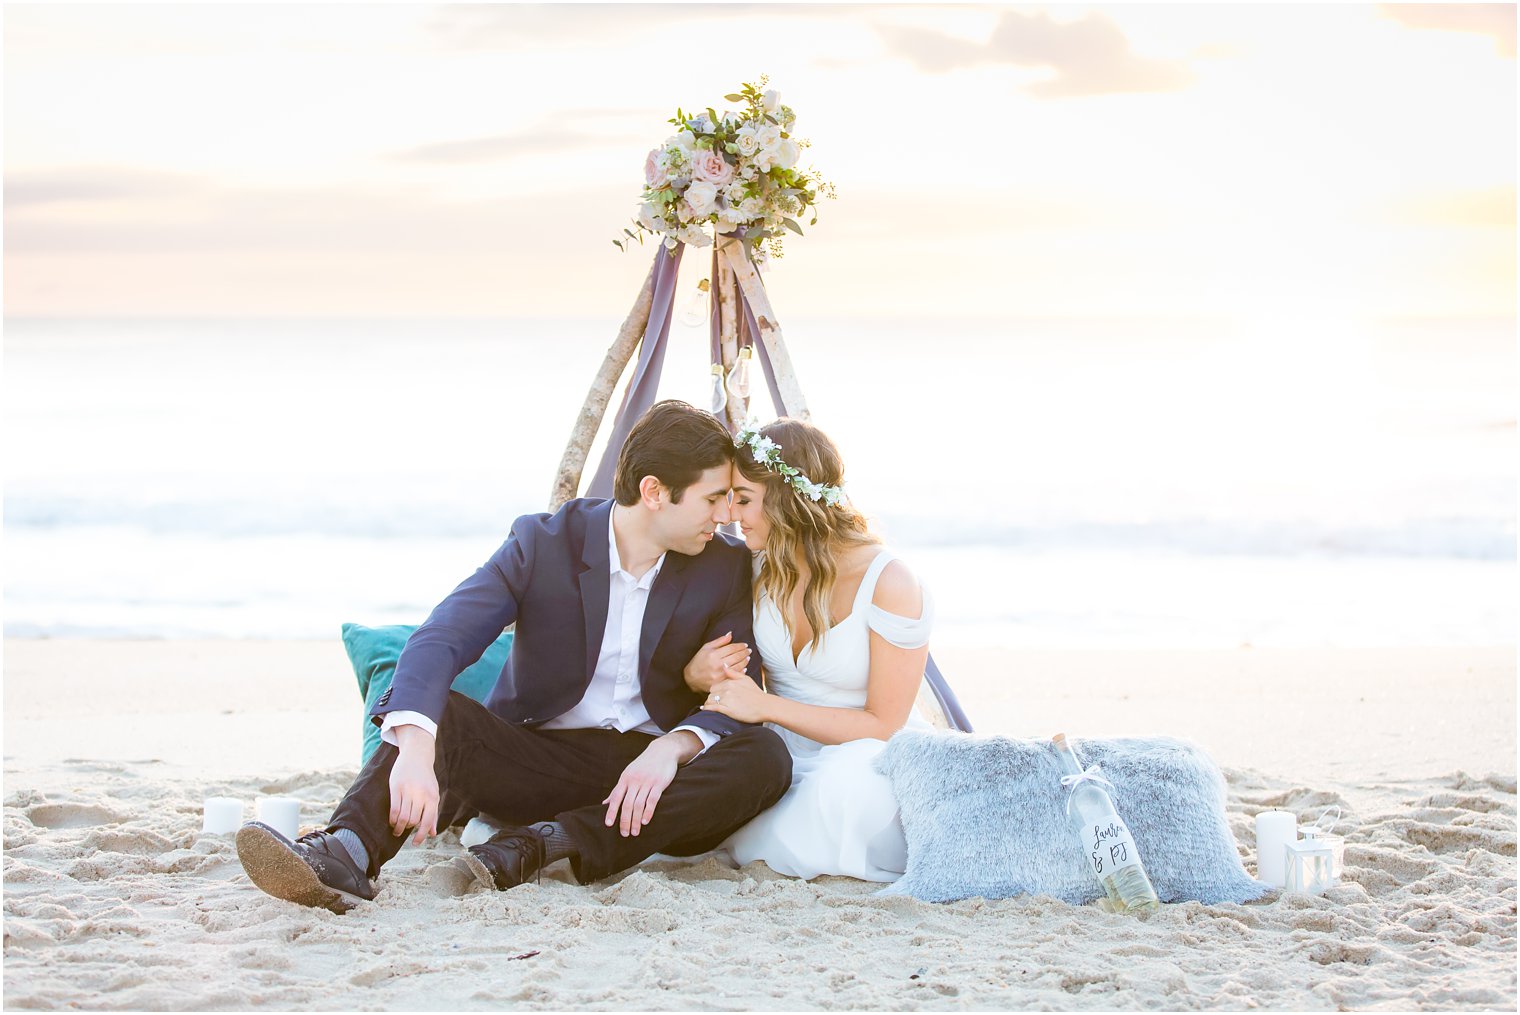 styled engagement session by Scarpaci Designs